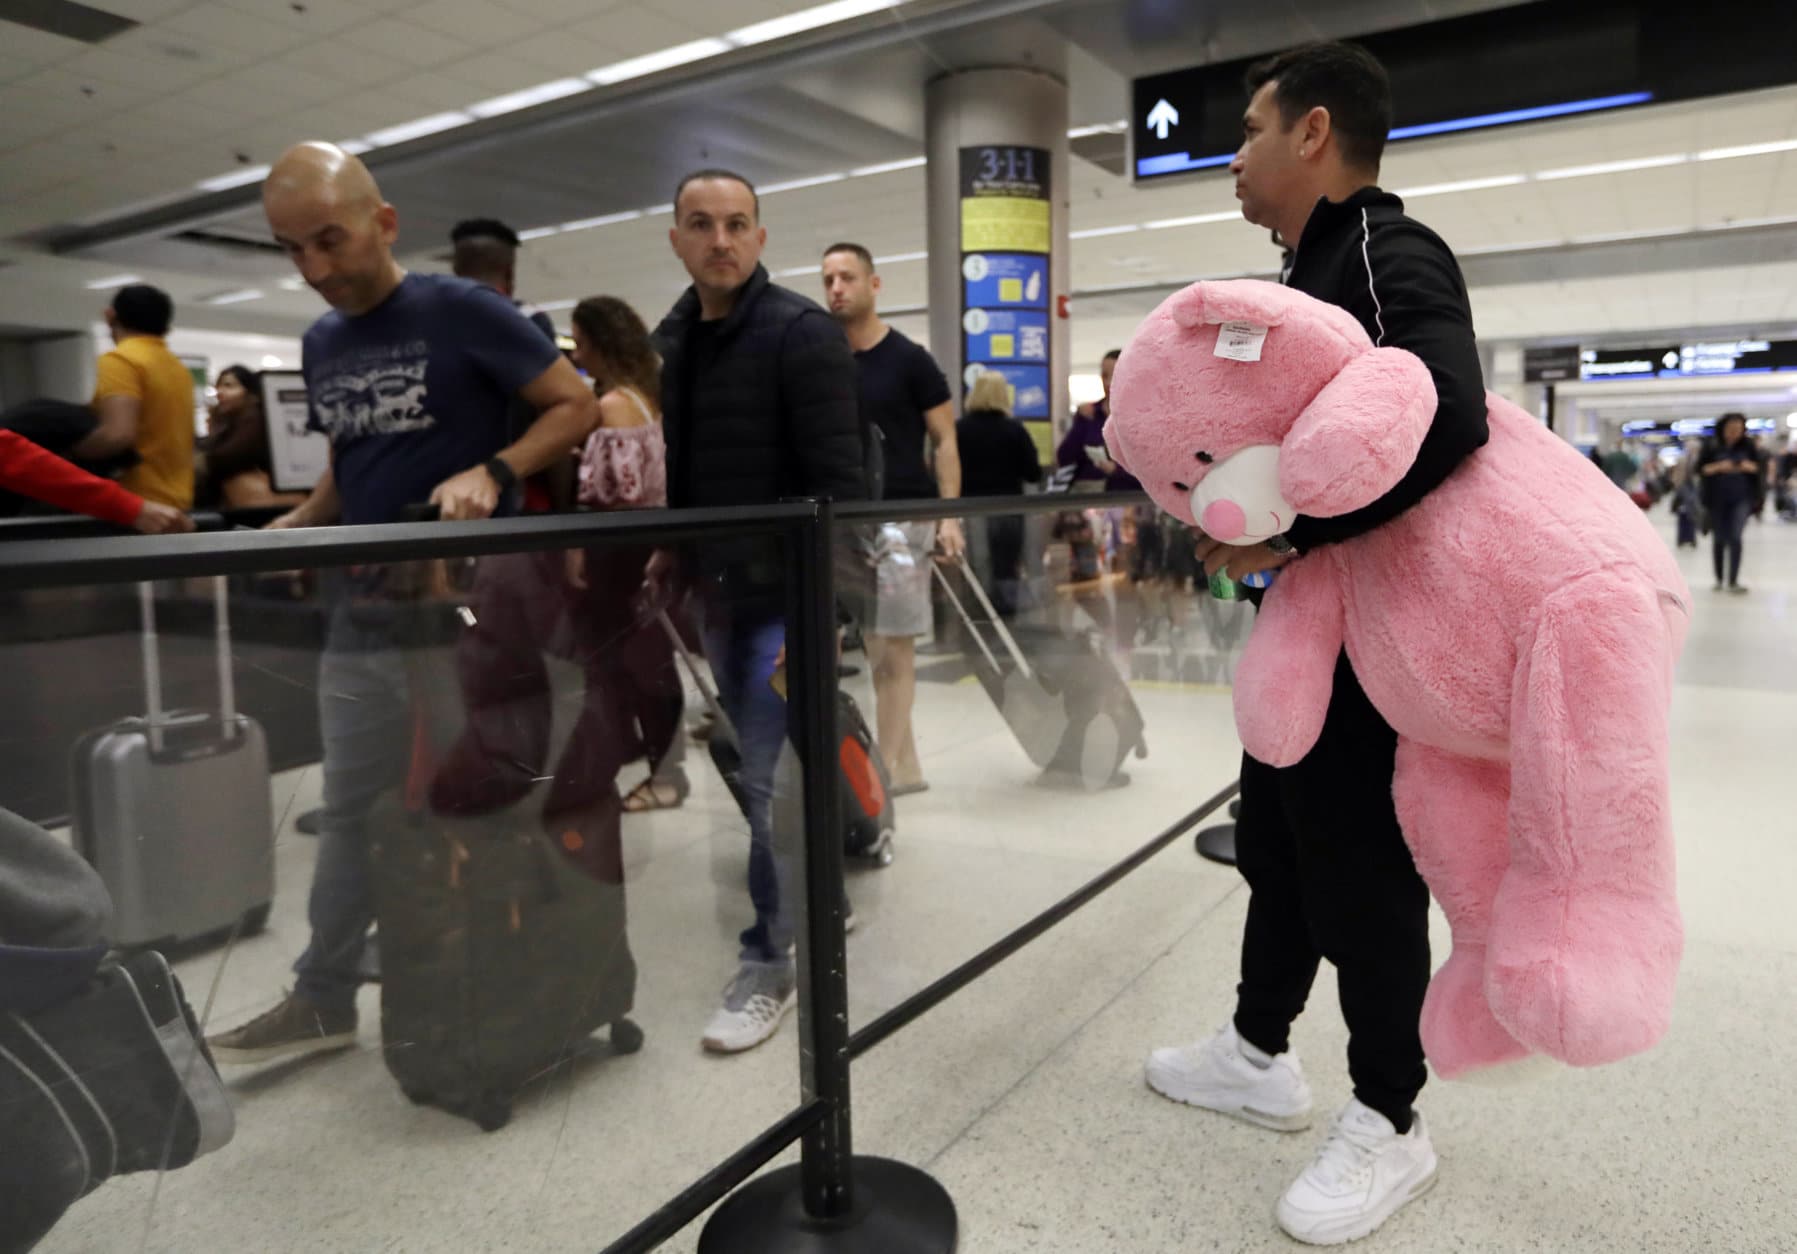 Carlos Gonzalez, right, watches as his daughter and other family members wait in line at a security checkpoint at Miami International Airport, Friday, Jan. 18, 2019, in Miami. The three-day holiday weekend is likely to bring bigger airport crowds. (AP Photo/Lynne Sladky)